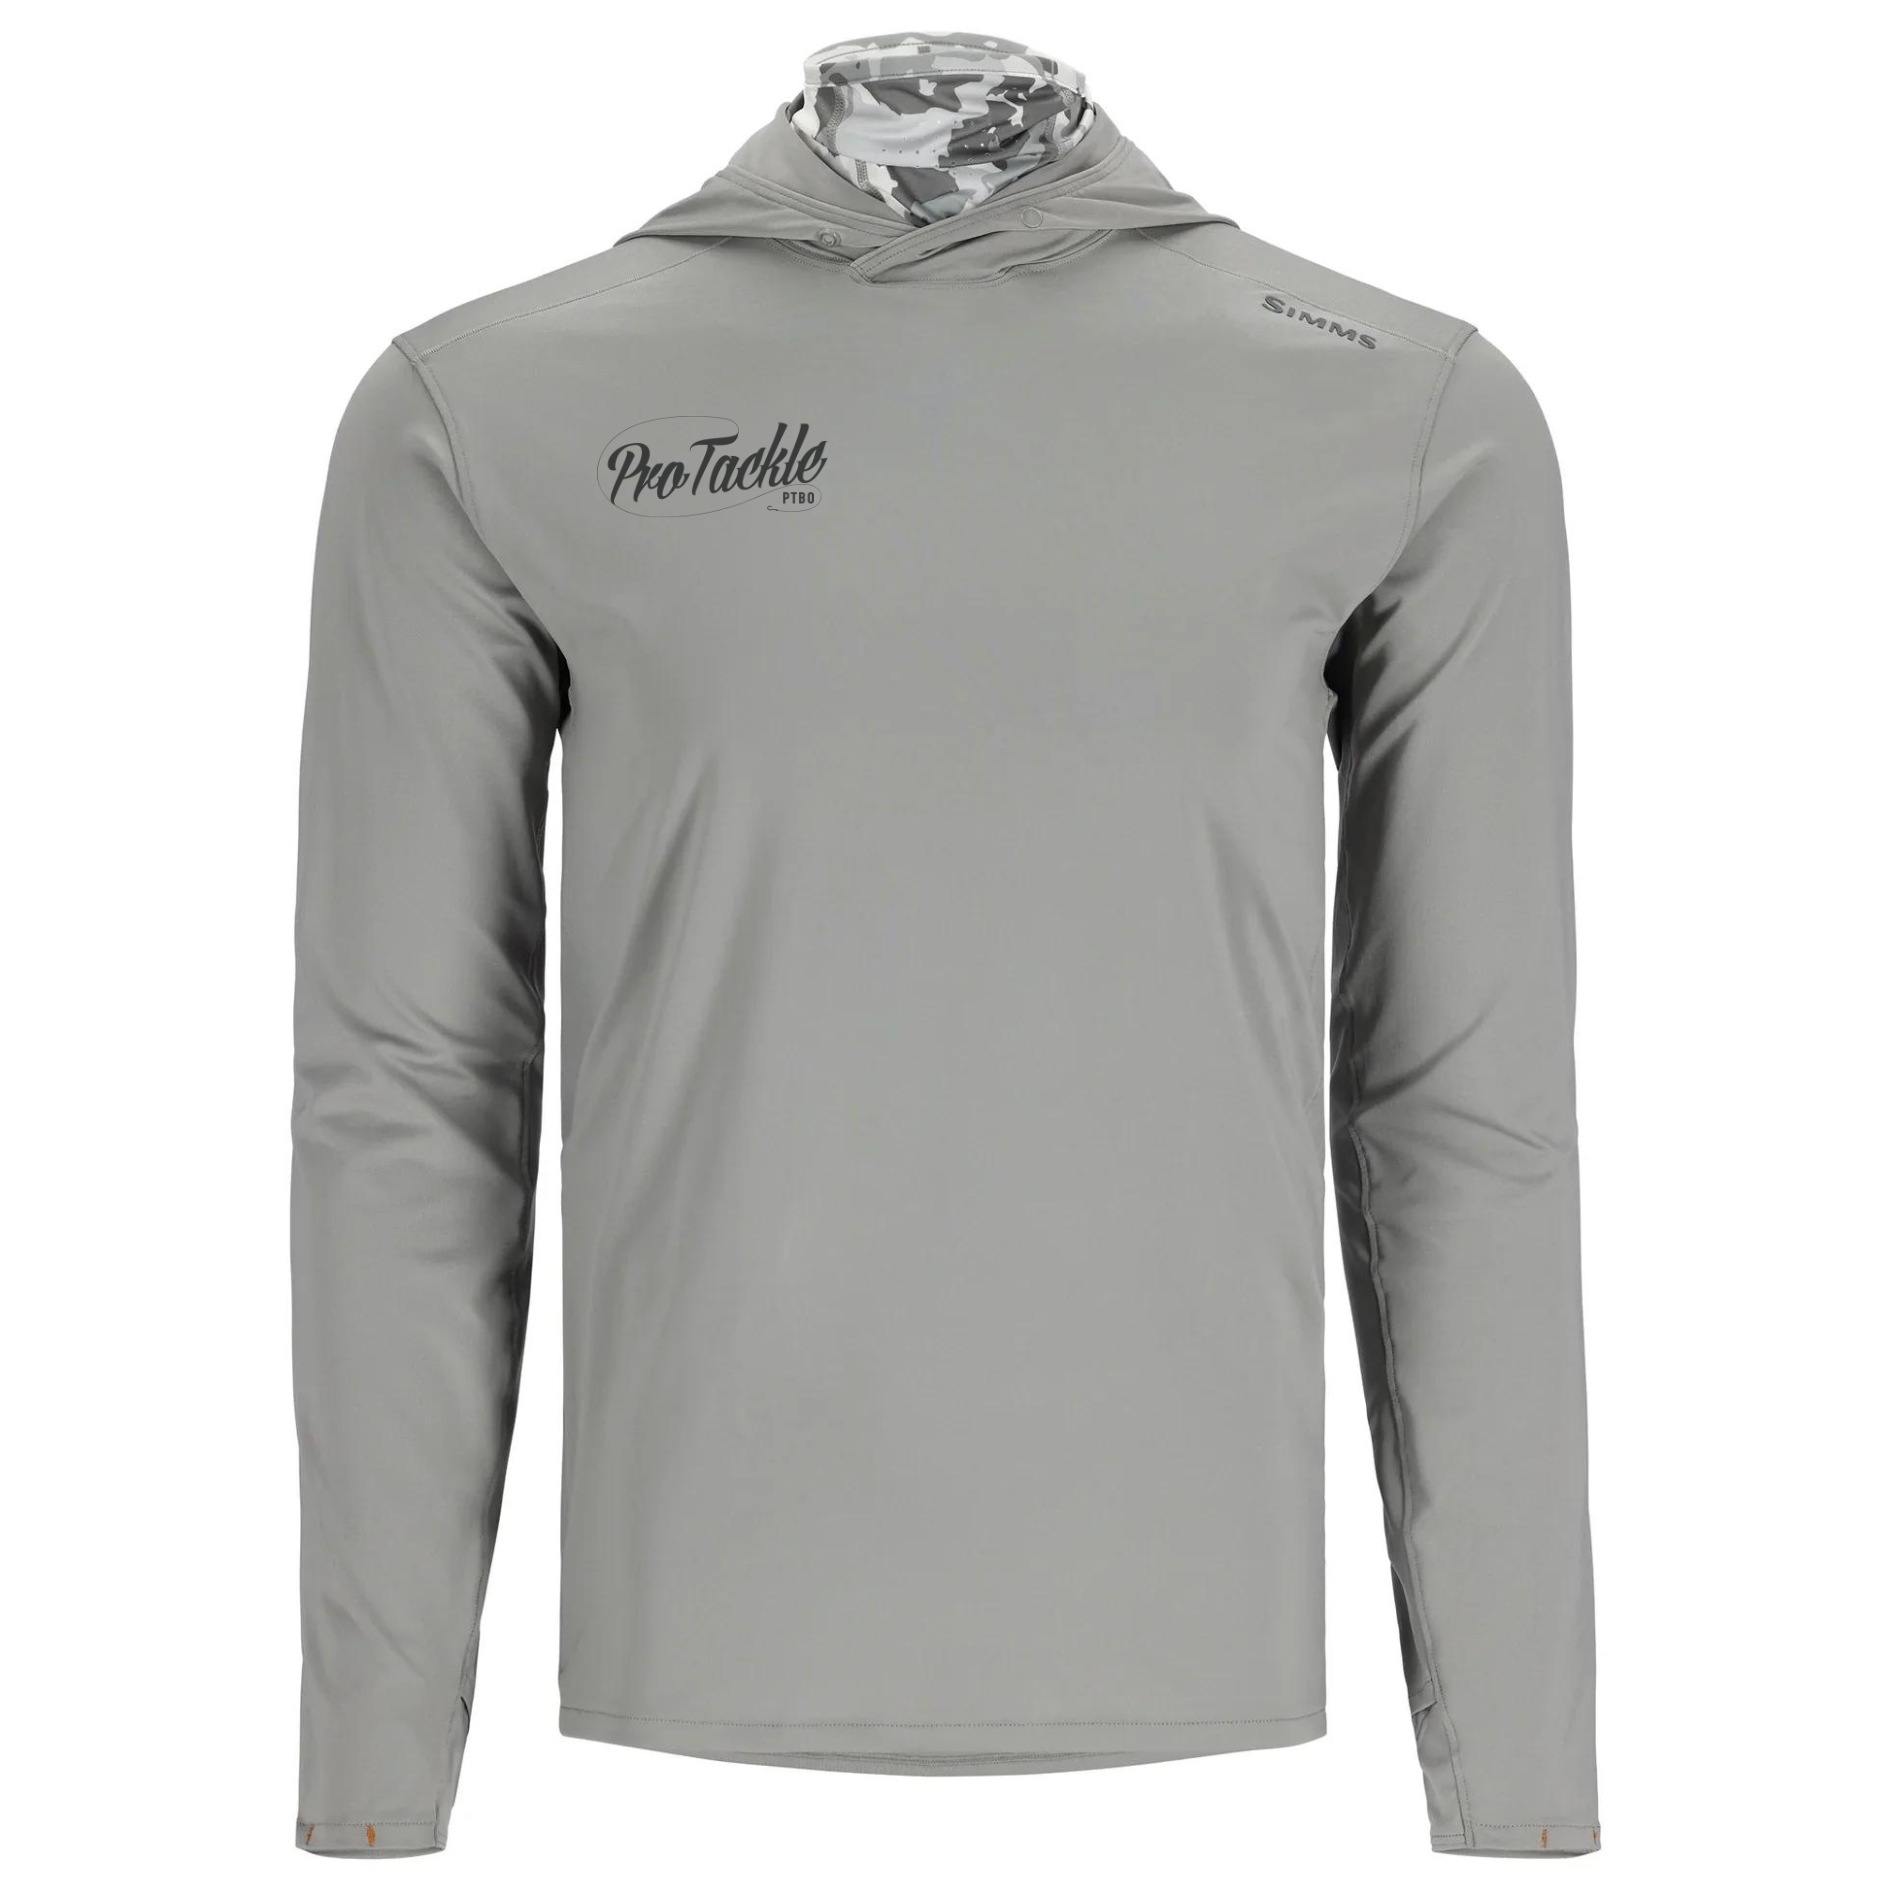 Simms X PTBO Pro Tackle M's Solarflex Guide Hoody X-Large / Cinder